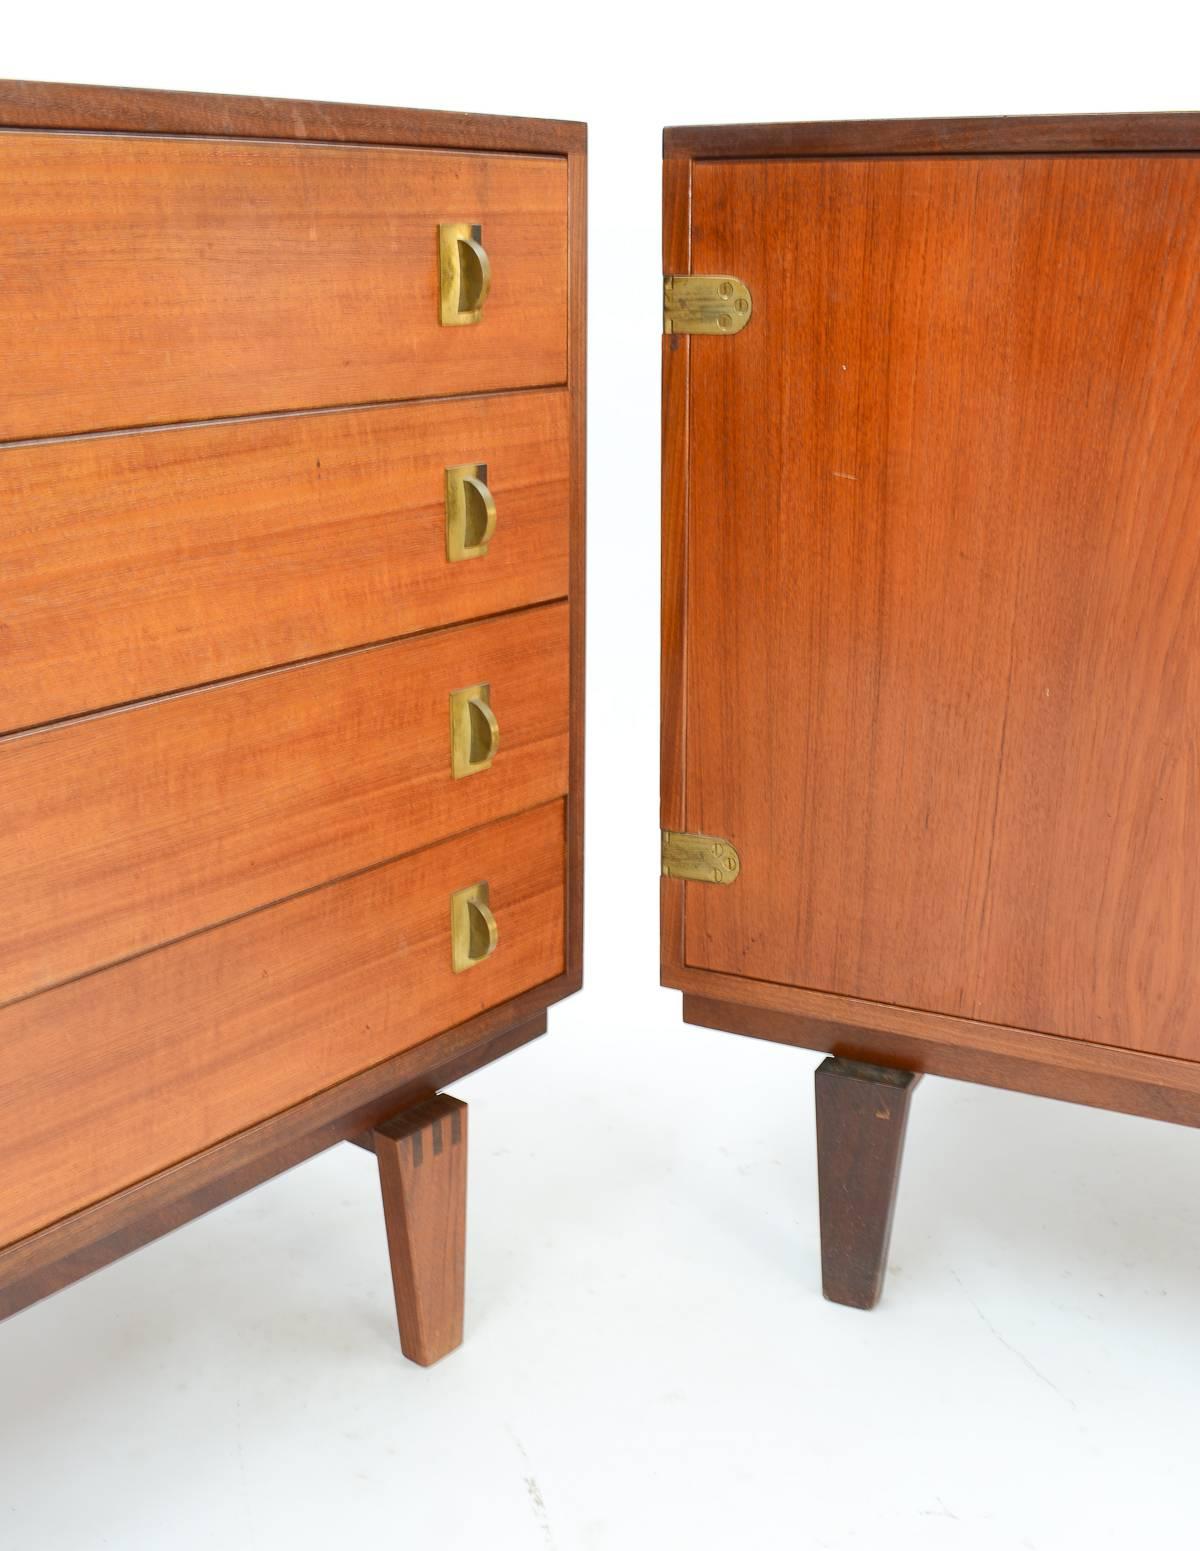 Mid-20th Century Pair of Finely Detailed Matching Peter Lovig Nielsen Credenzas with Brass Pulls